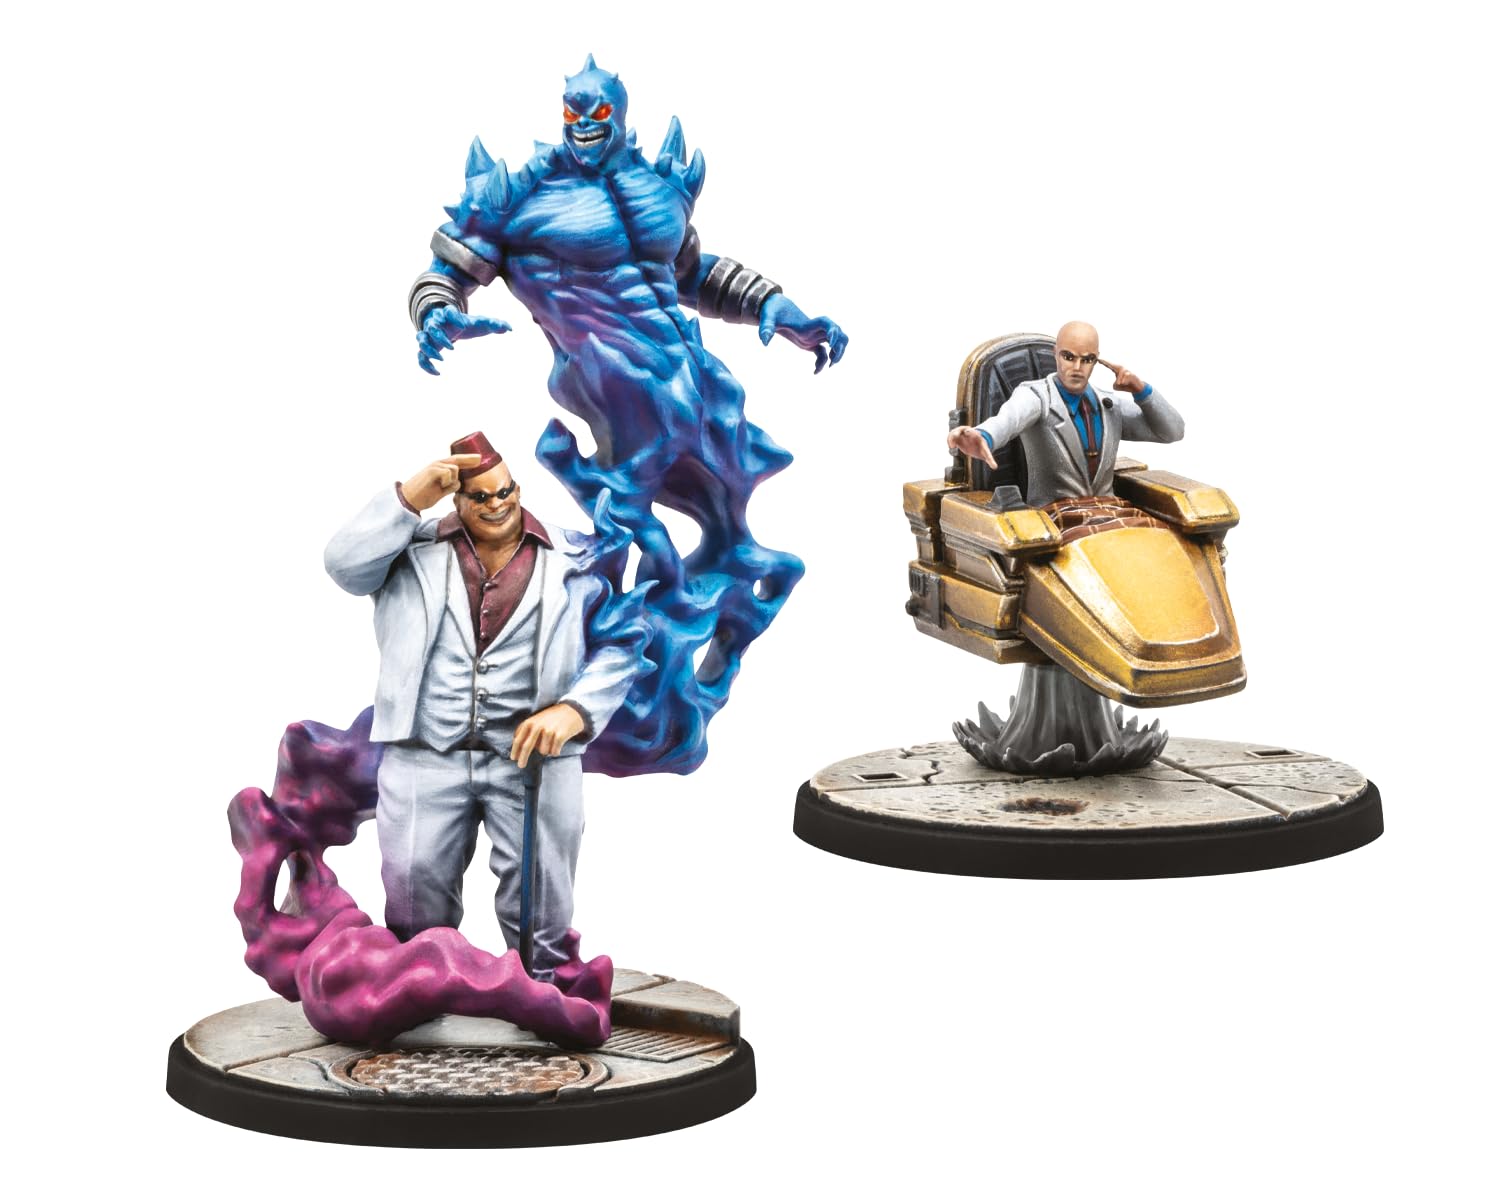 Marvel: Crisis Protocol Professor X & Shadow King Character Pack - Mystic Manipulators with Unique Abilities! Tabletop Superhero Game, Ages 14+, 2 Players, 90 Min Playtime, Made by Atomic Mass Games